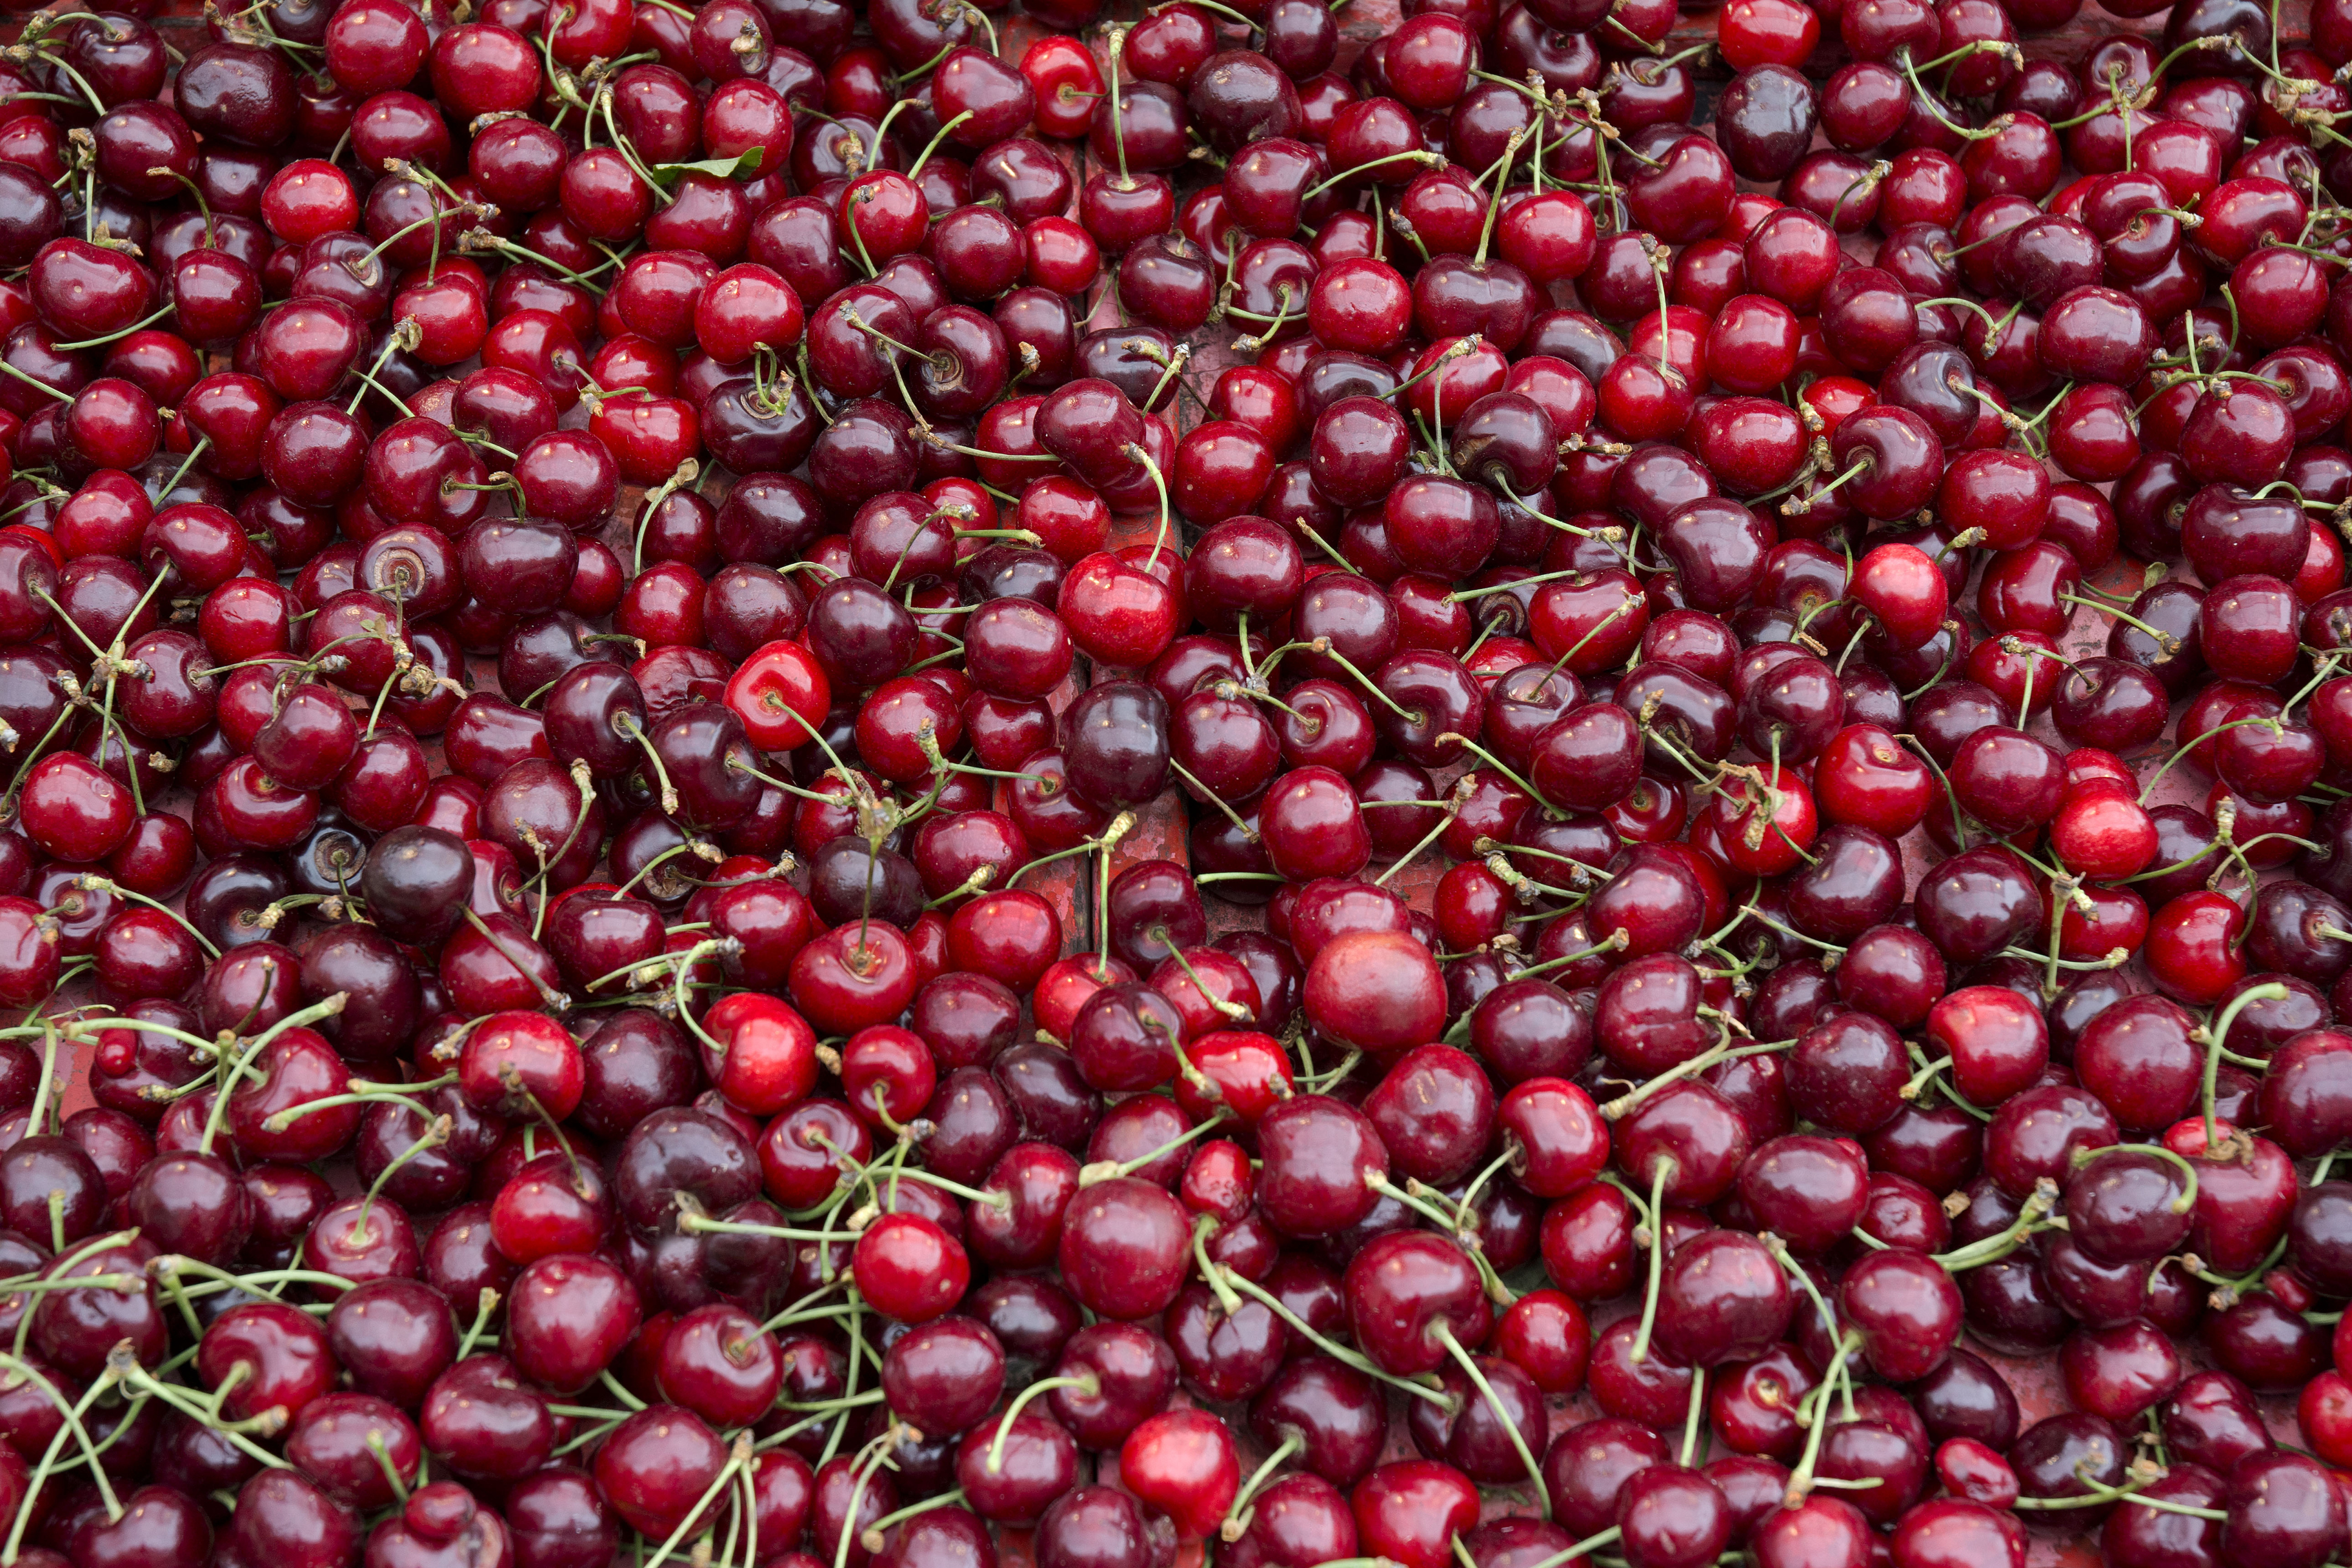 “If you like cherries, chances are you are going to have a really good May,” says Parker.